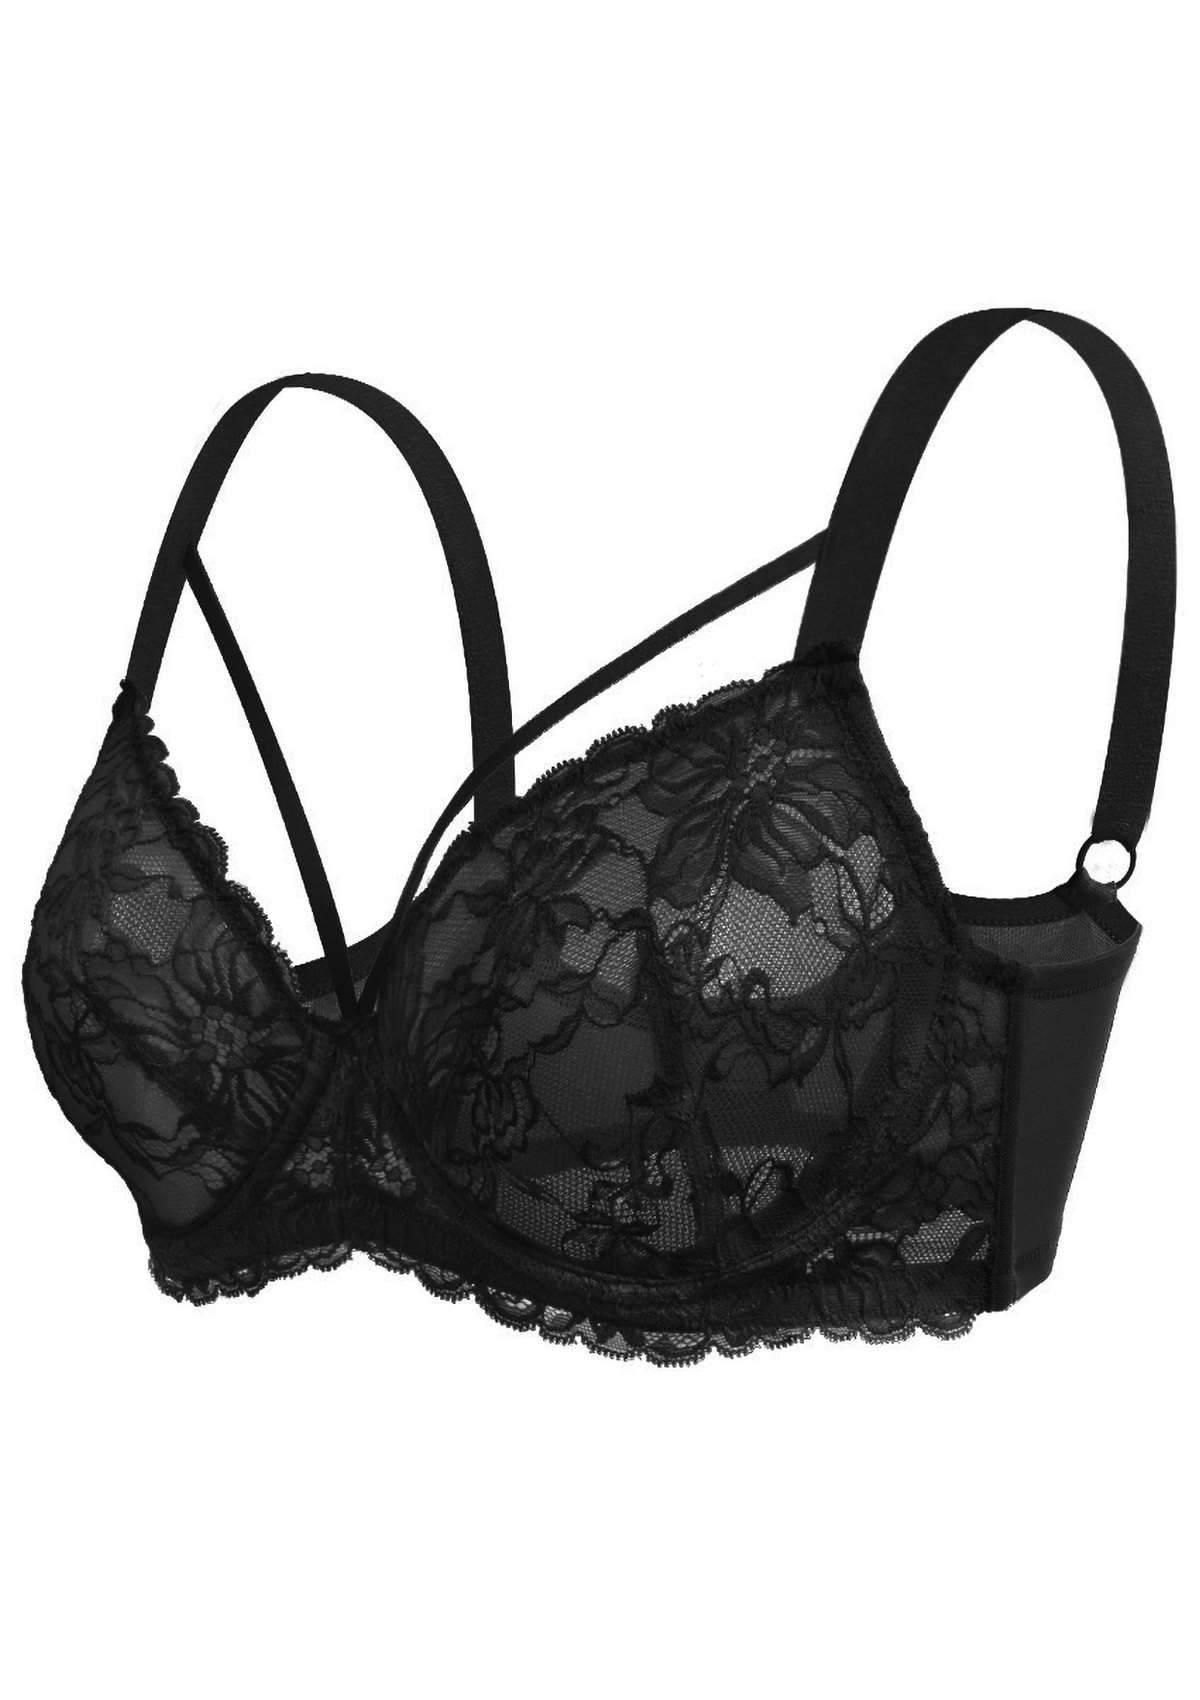 HSIA Pretty In Petals Bra - Plus Size Lingerie For Comfrot And Support - Black / 34 / B